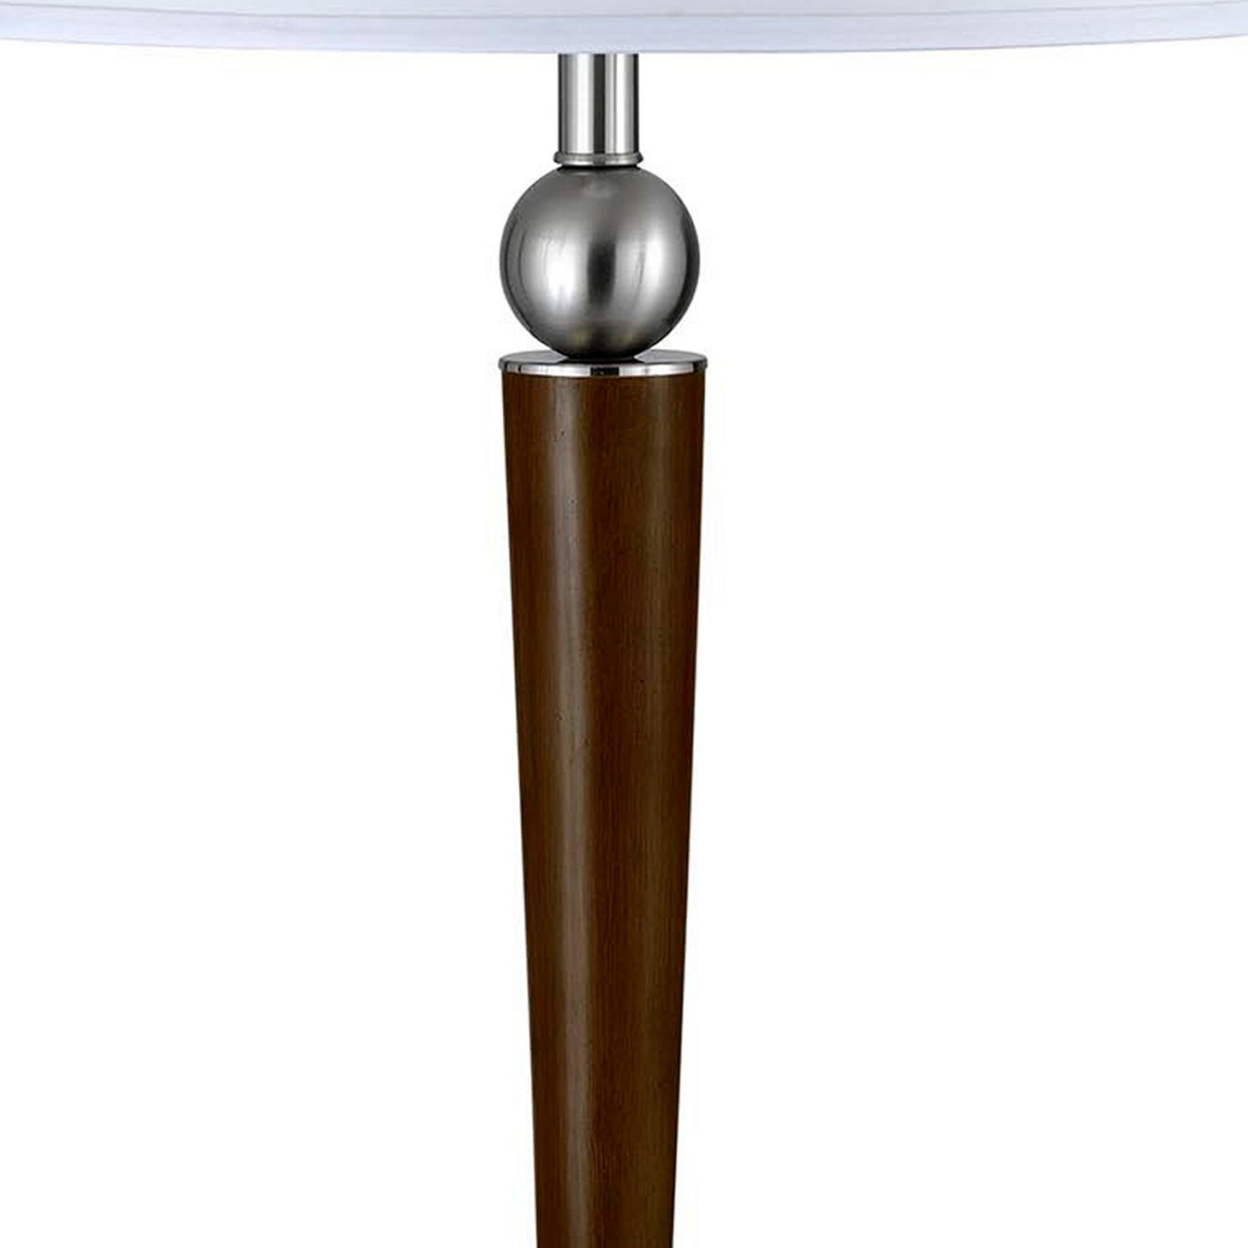 2 Bulb Wooden Body Table Lamp With Fabric Tapered Shade, White And Brown- Saltoro Sherpi